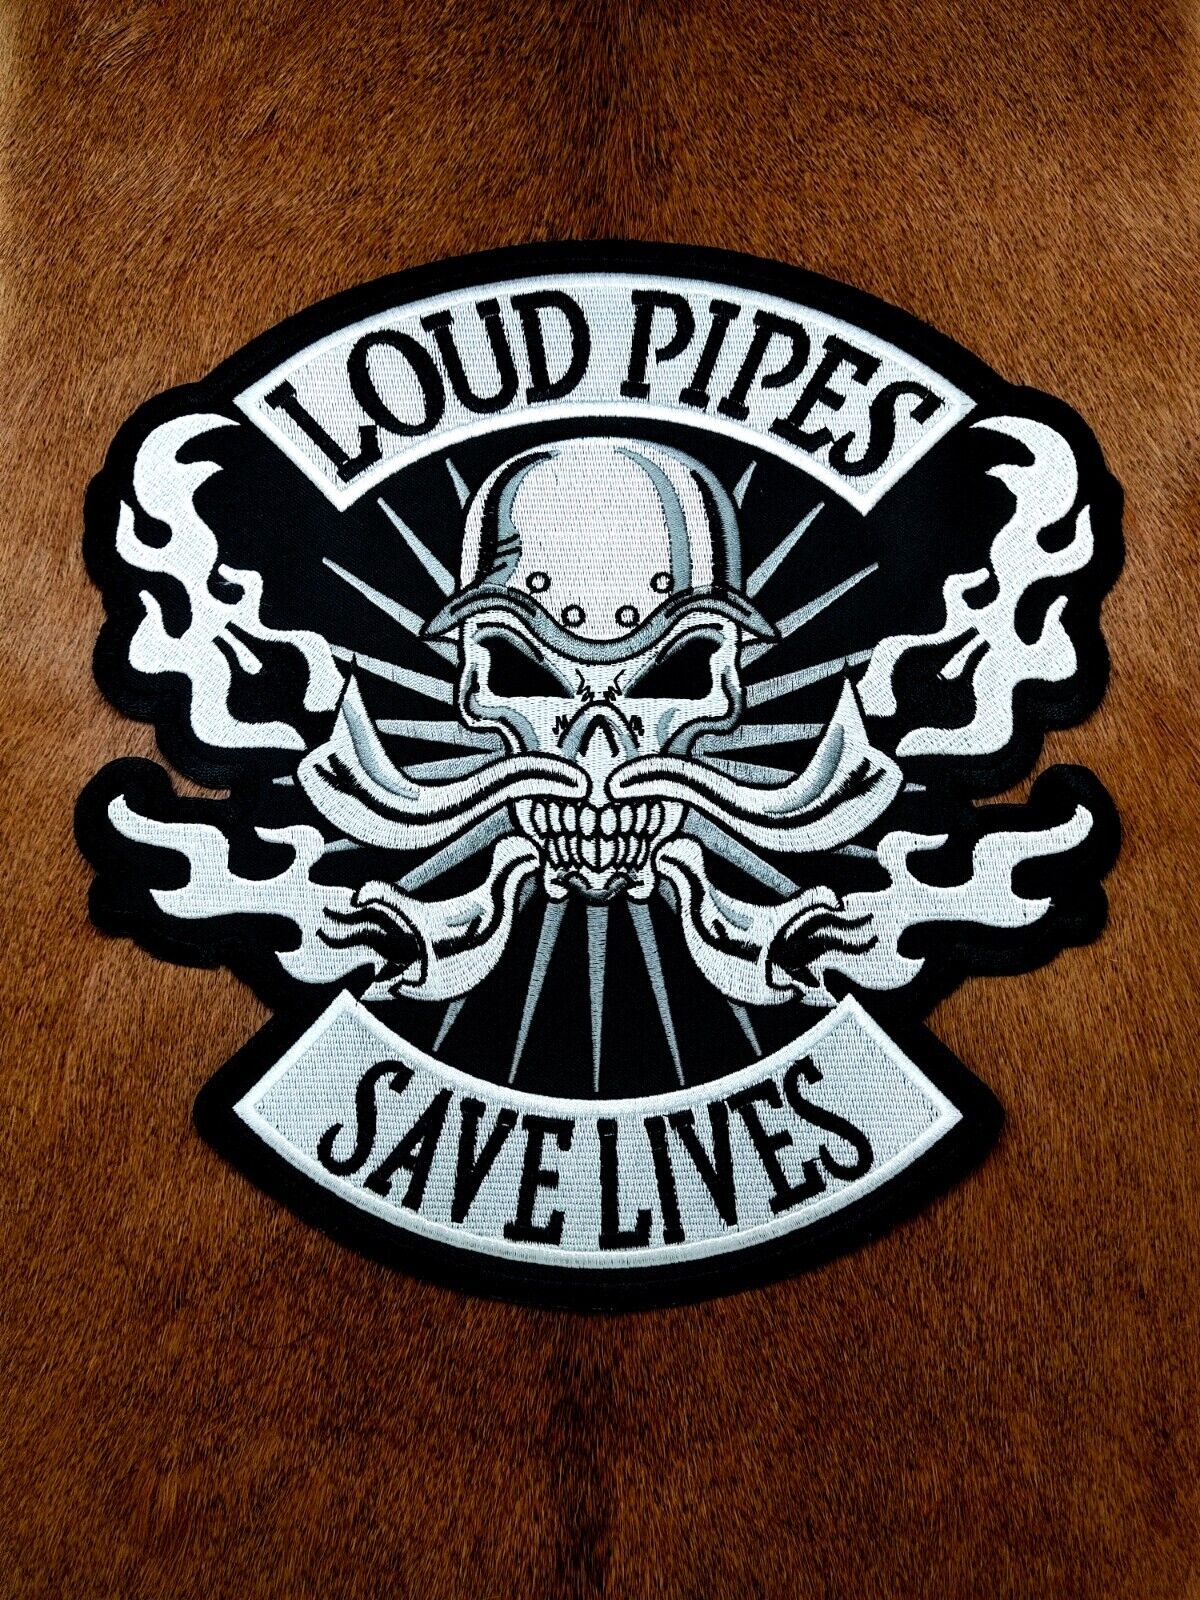 Loud Pipes Save Lives Skull Biker Motorcycle Large Patch Iron On Embroidered Ves